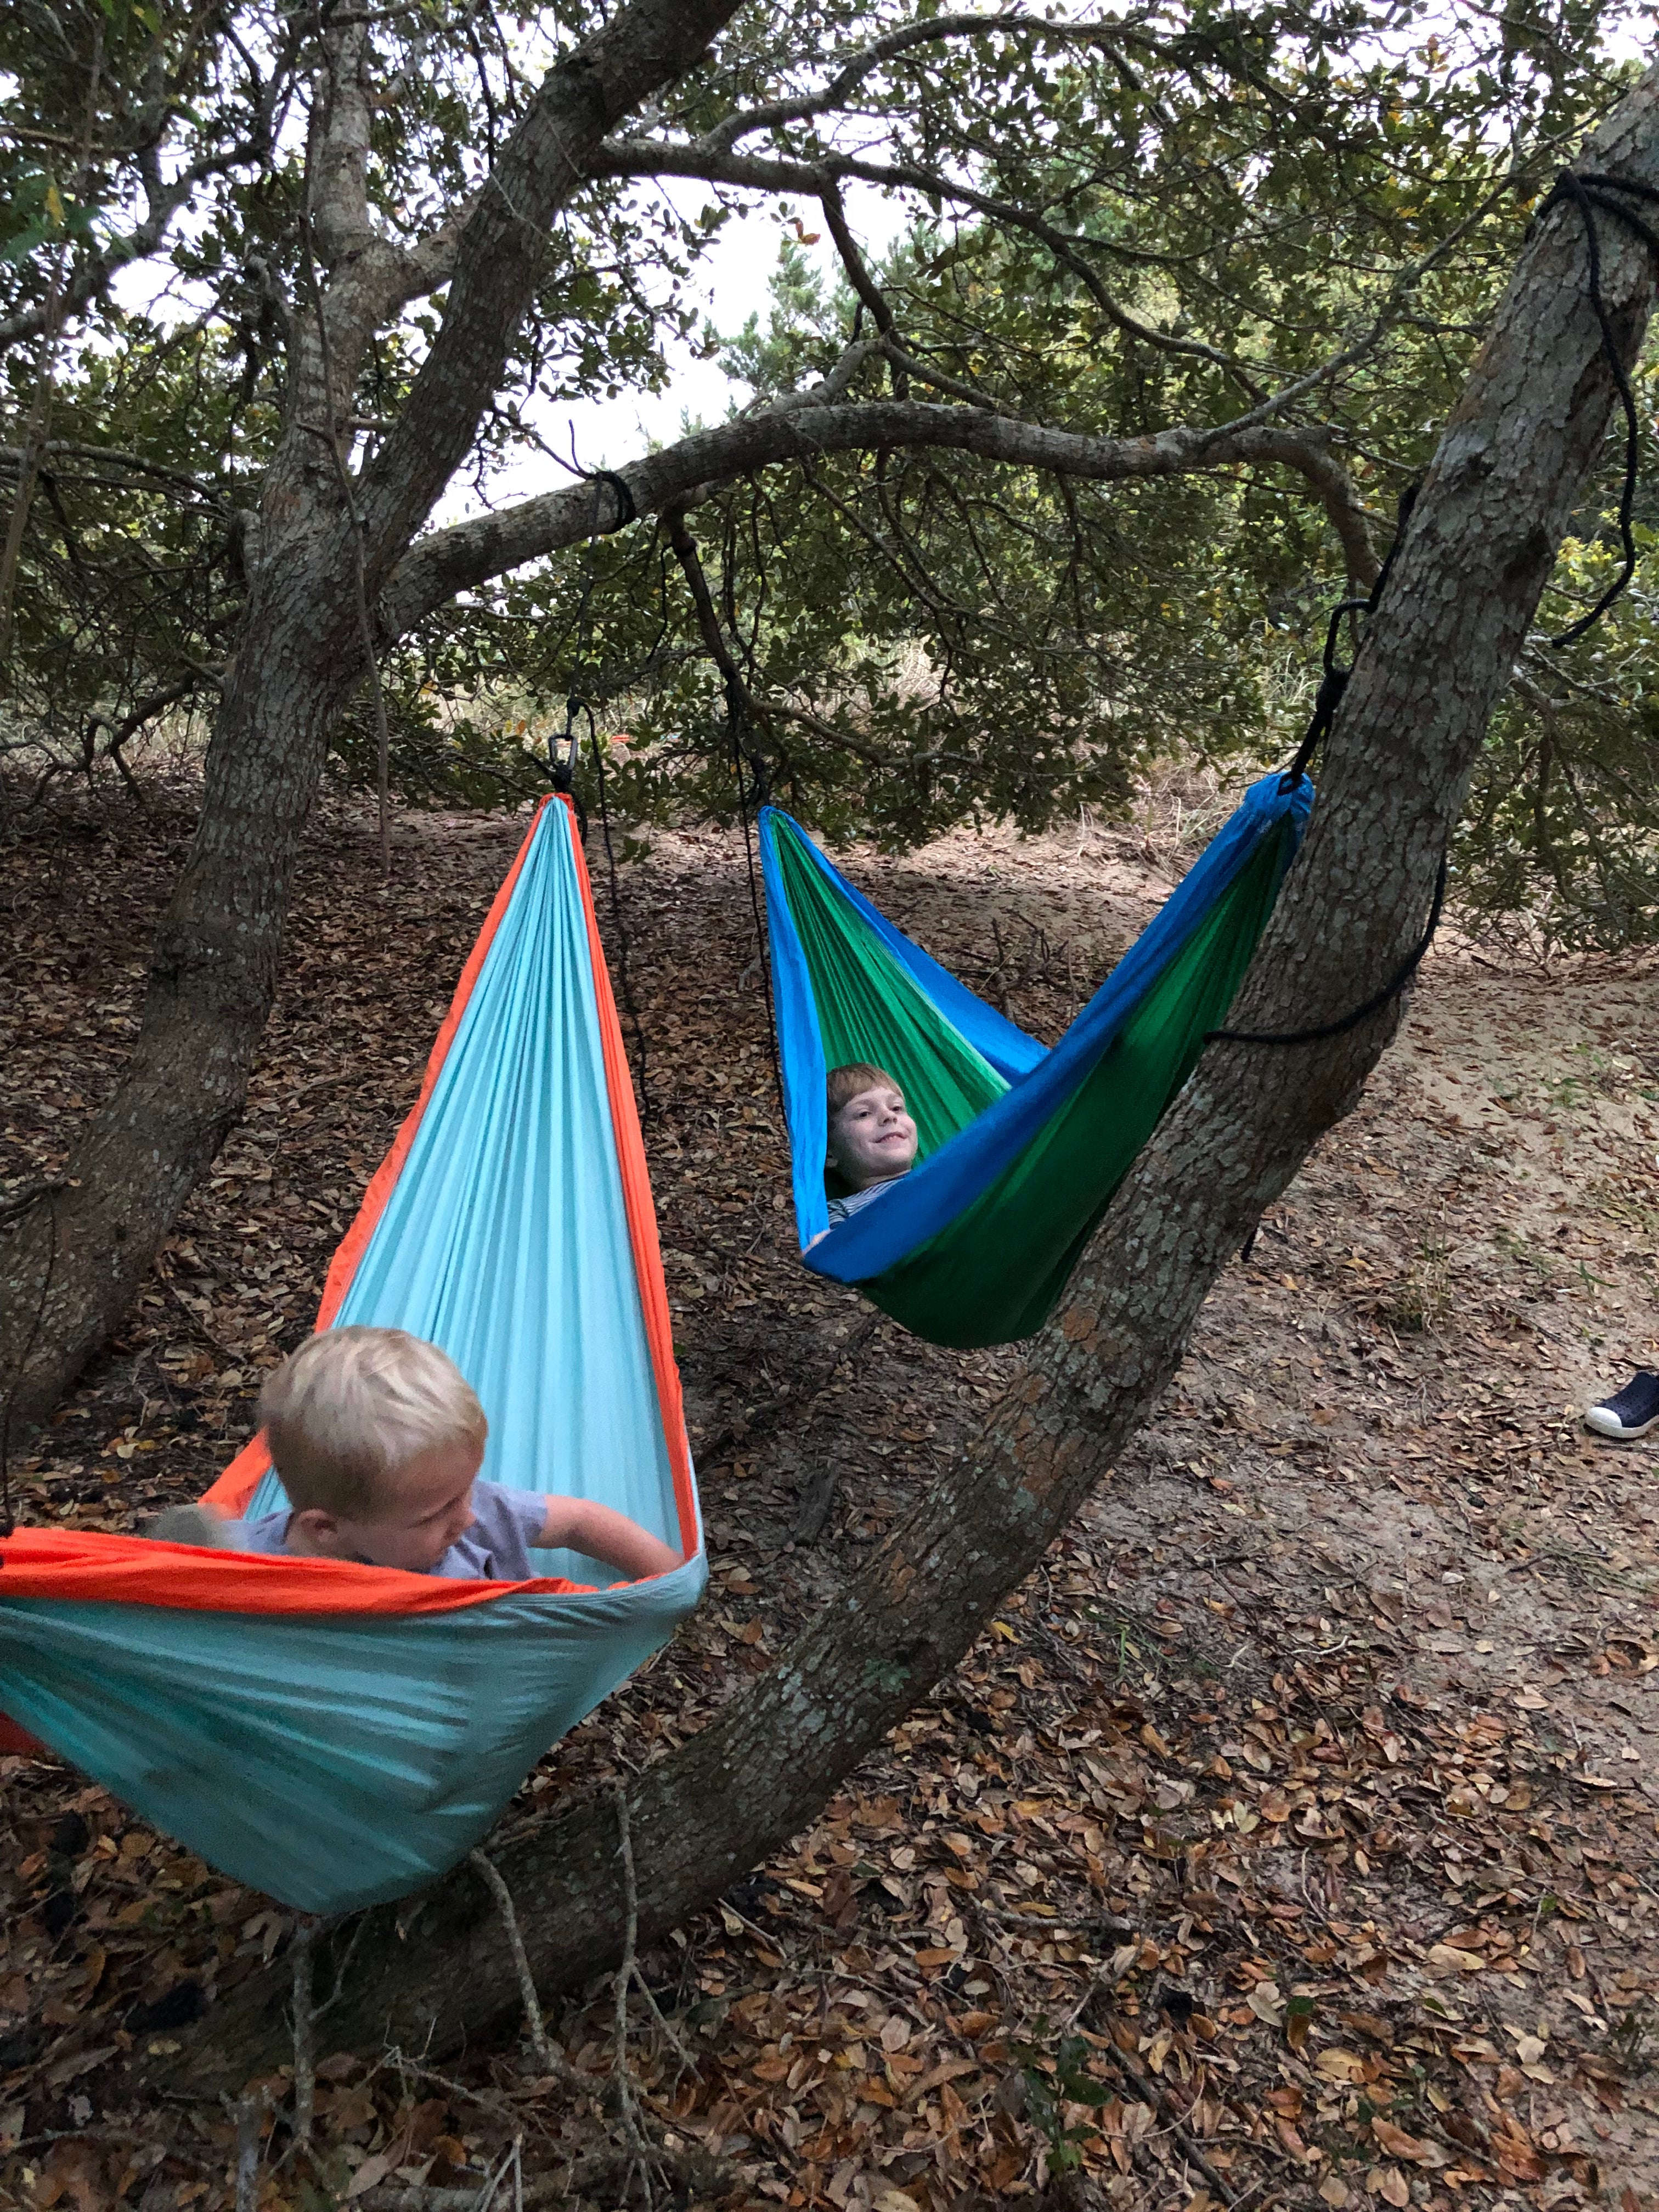 Great trees for the hammocks